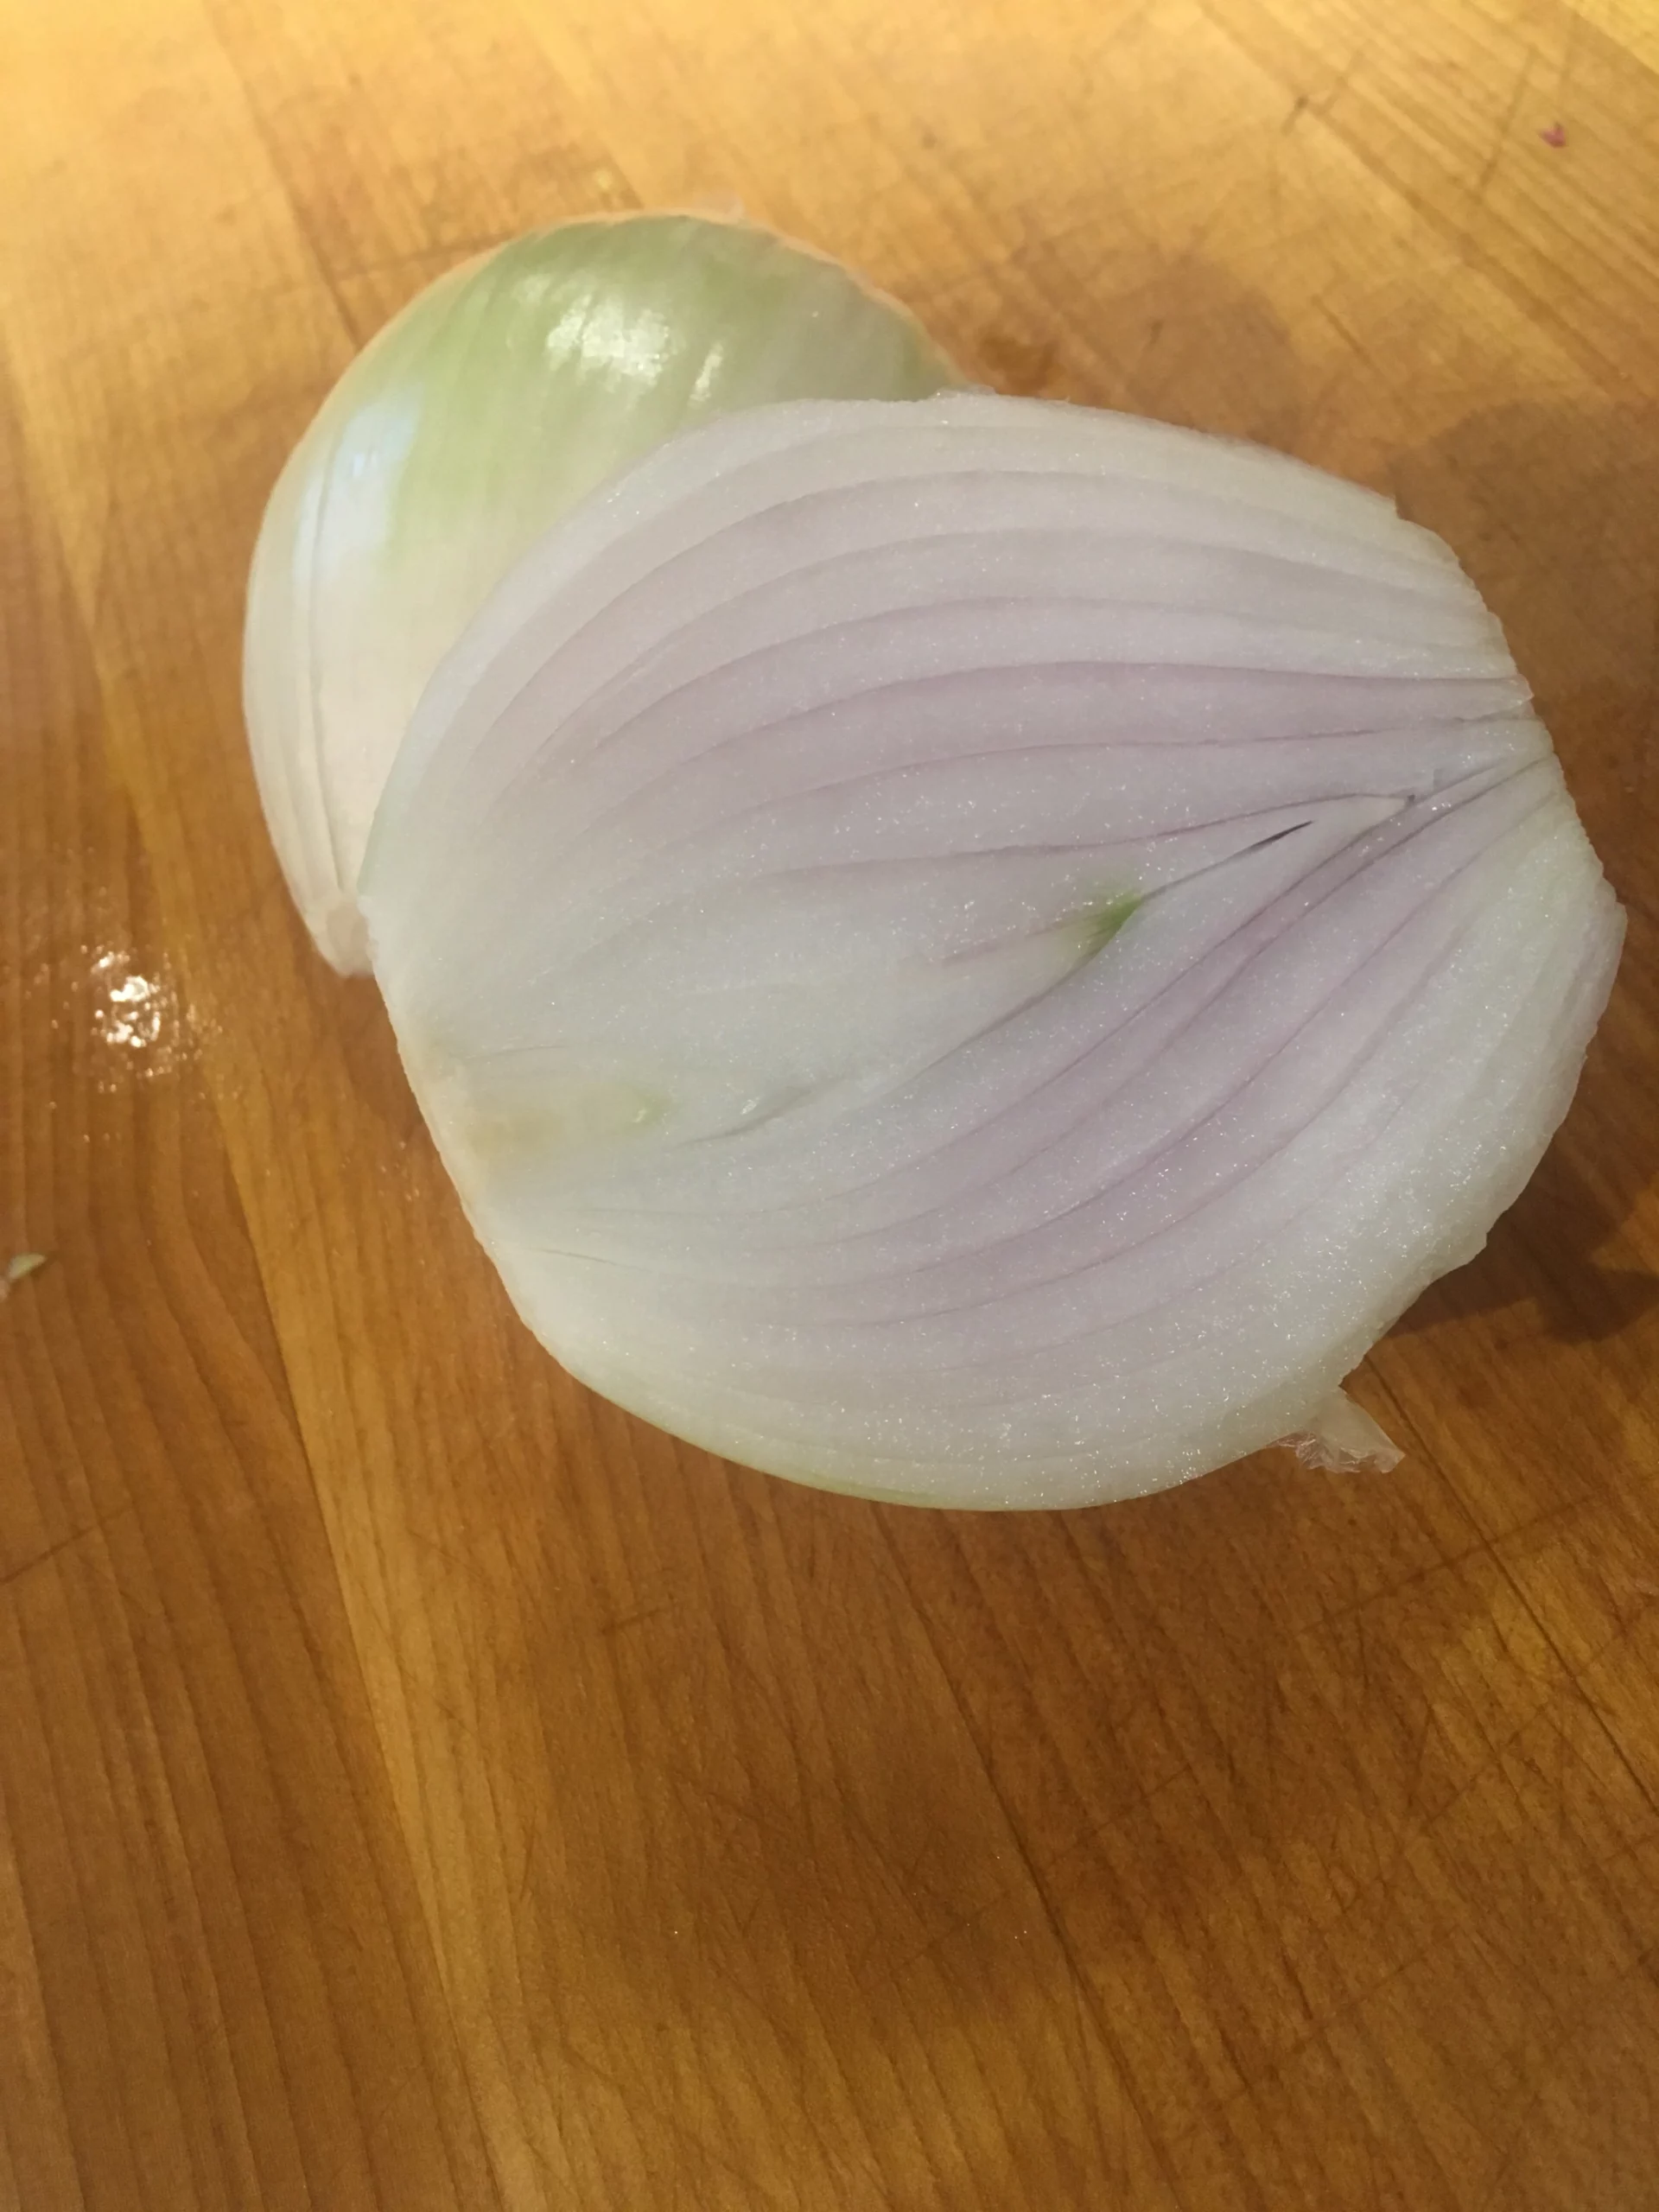 Featured image for “Onion”